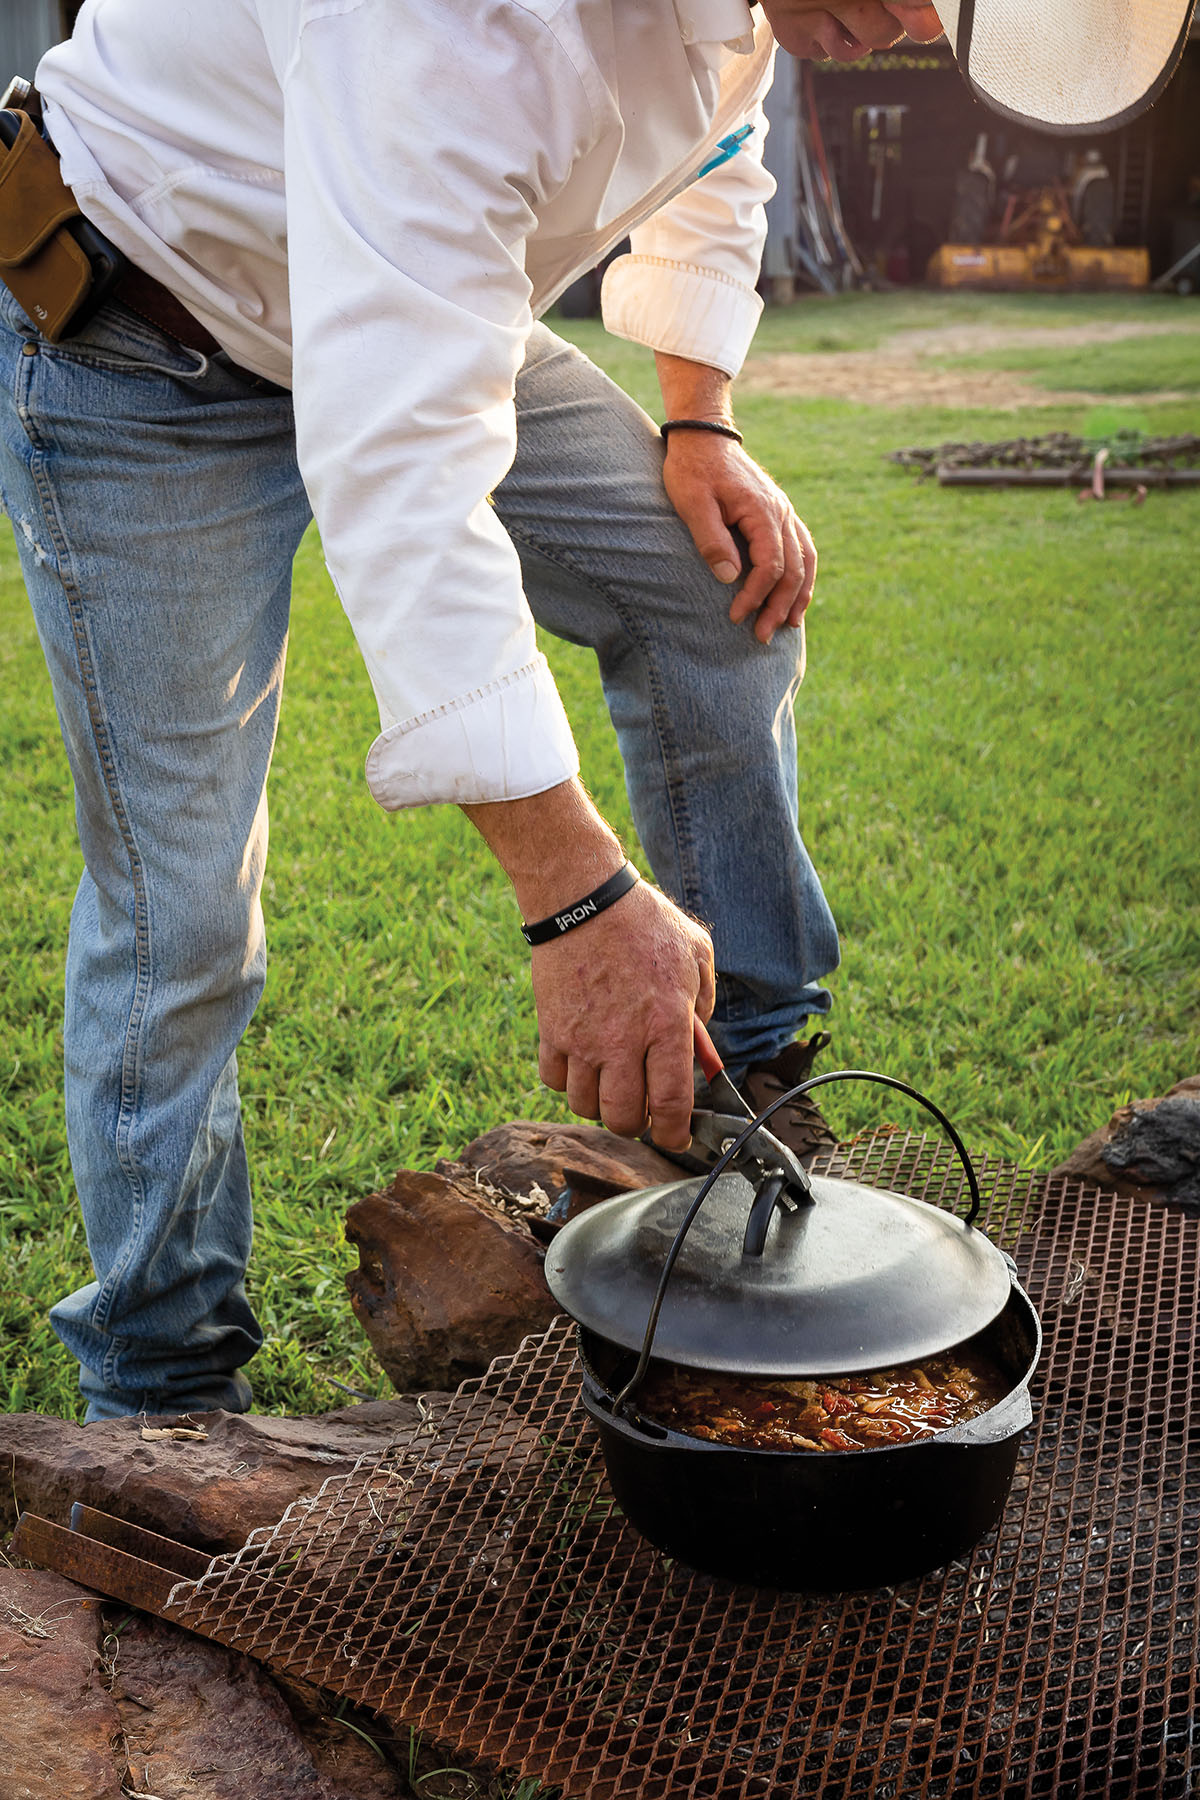 A man in a white shirt leans over a cast-iron cook pot